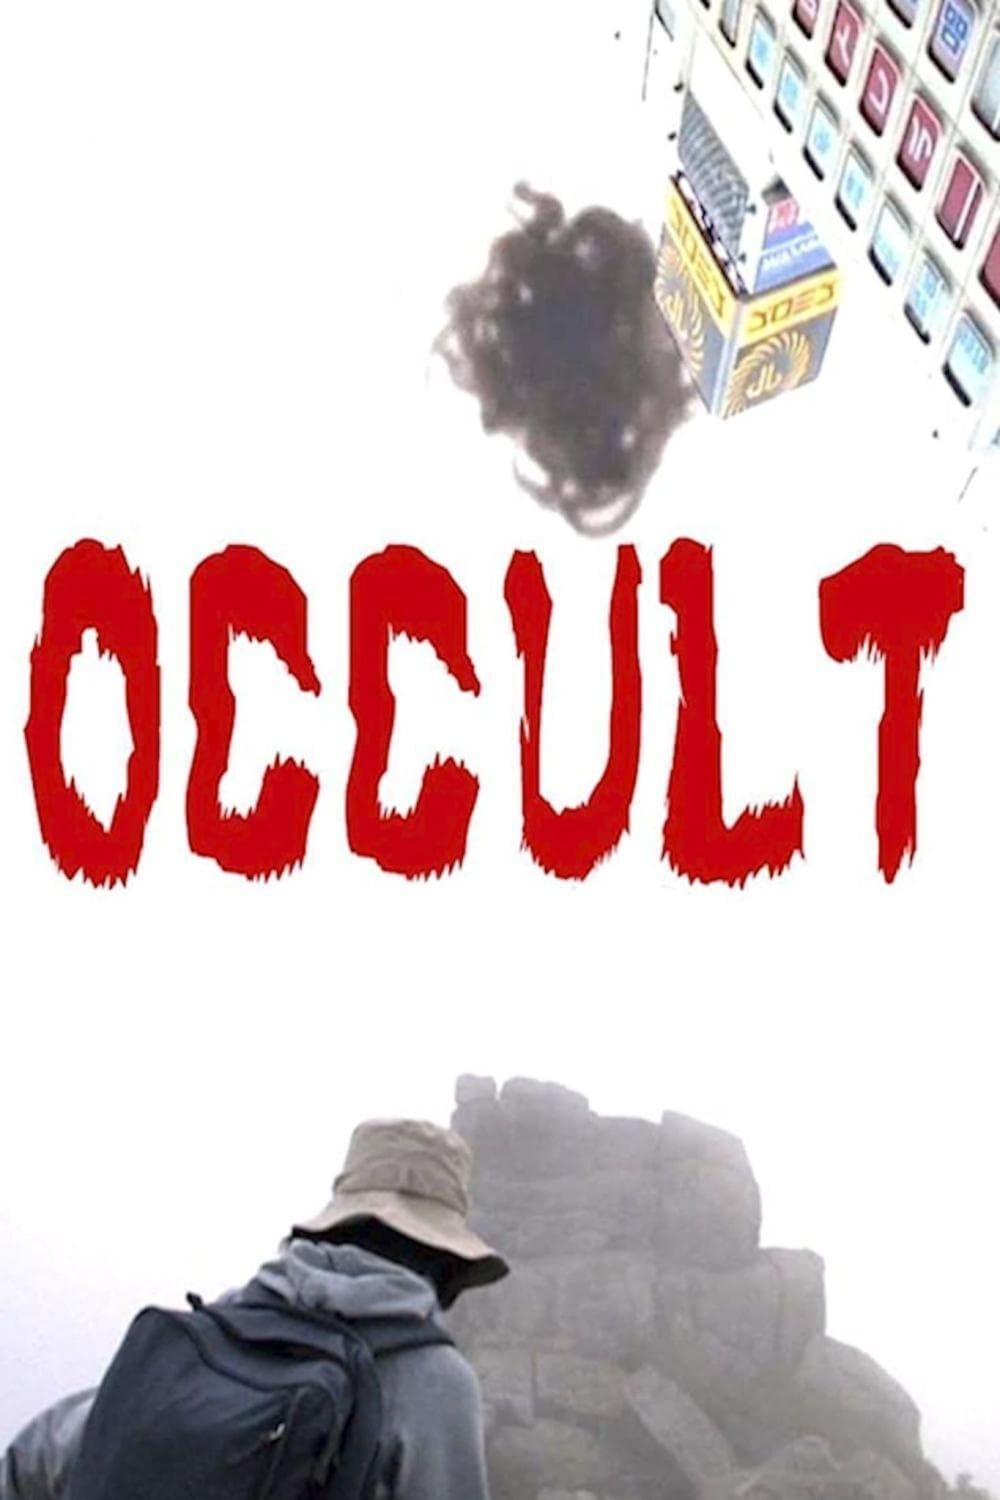 Occult poster